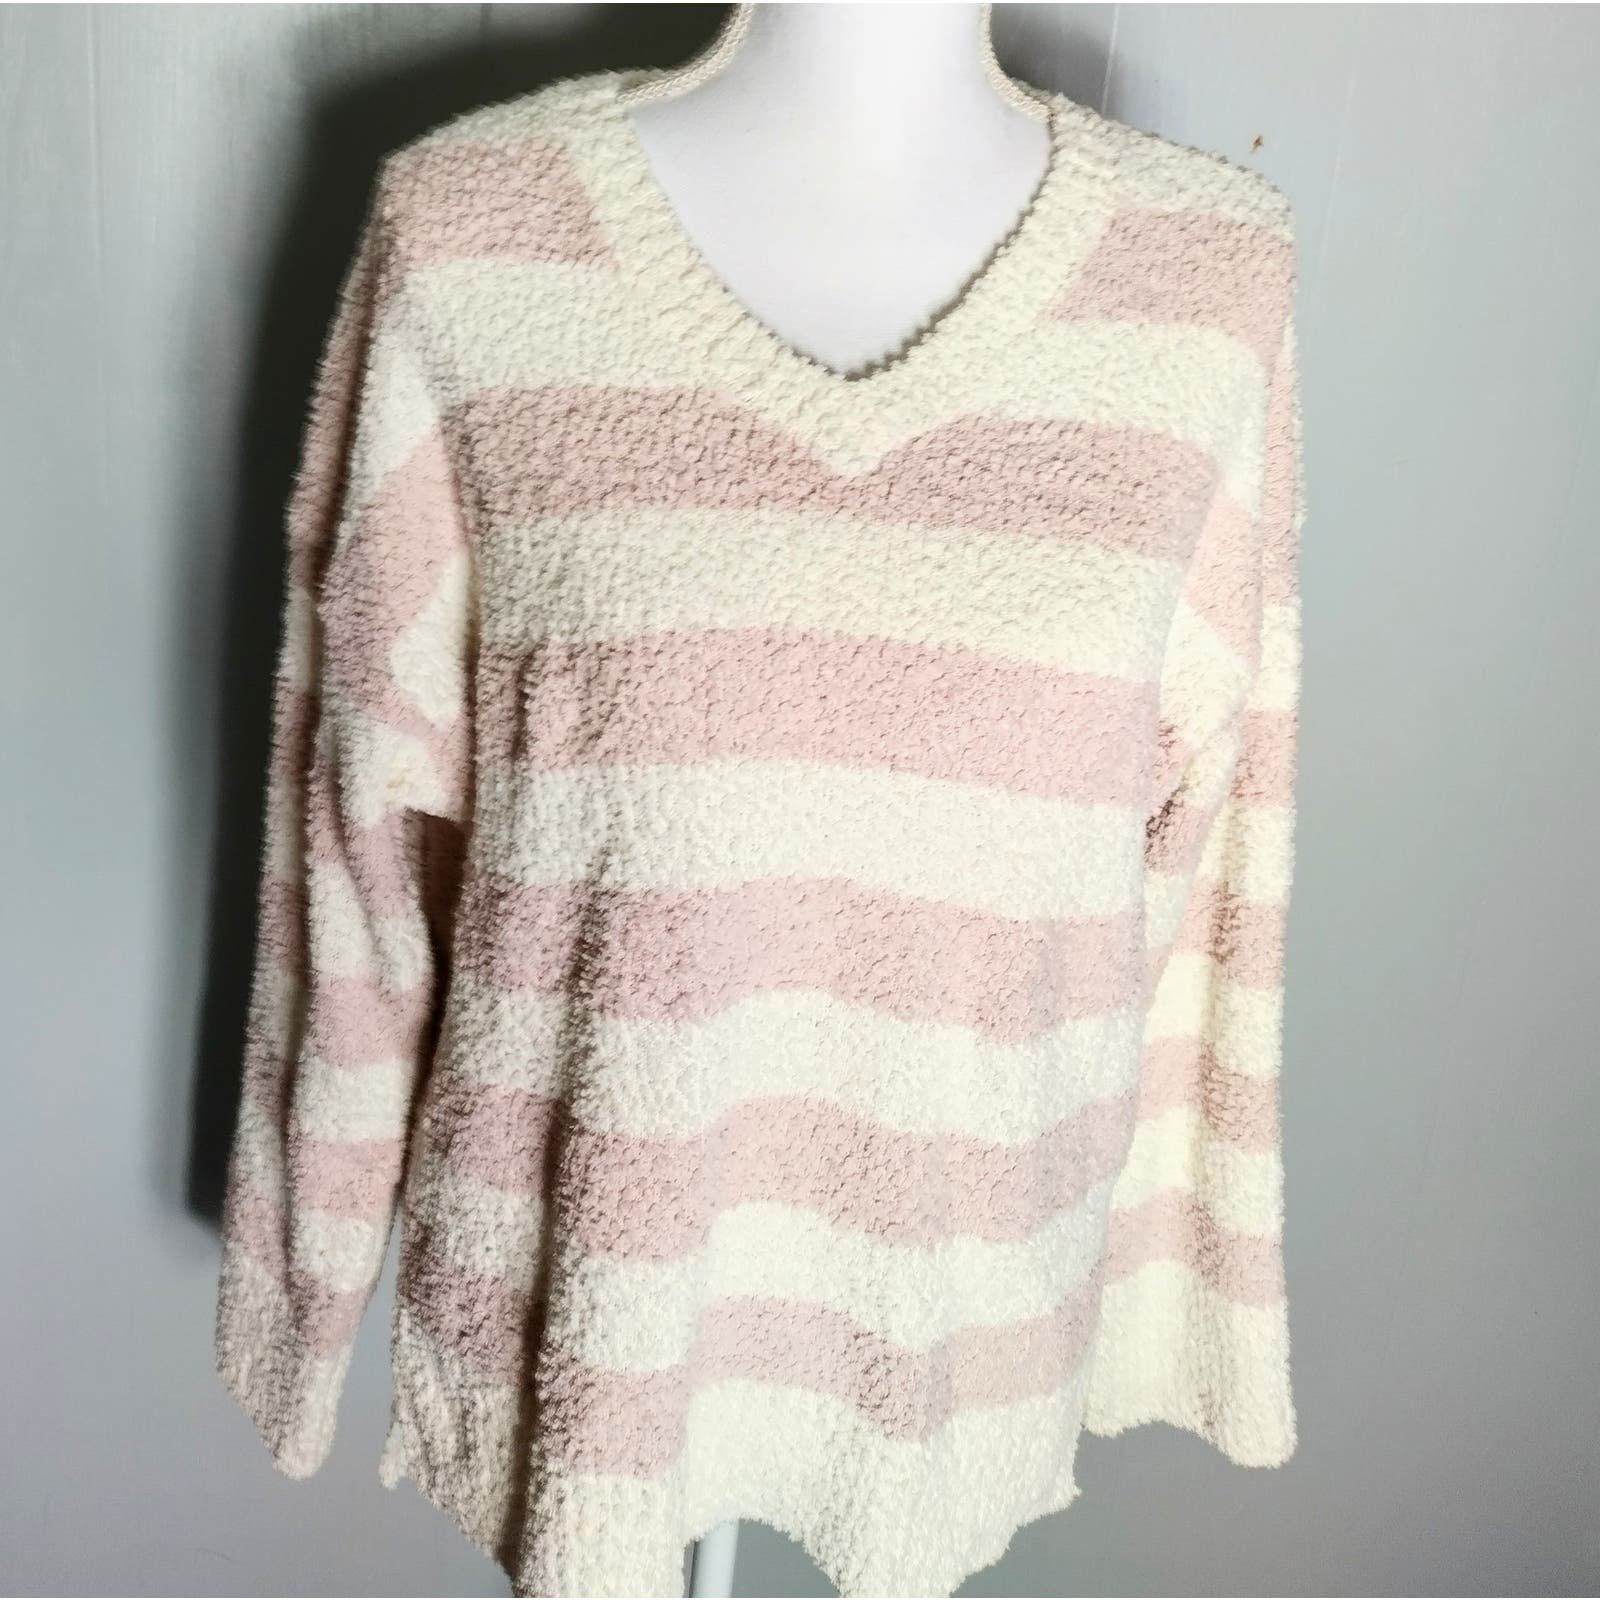 the Lowest price Sanctuary Women Soft & Cozy Pink & Whi